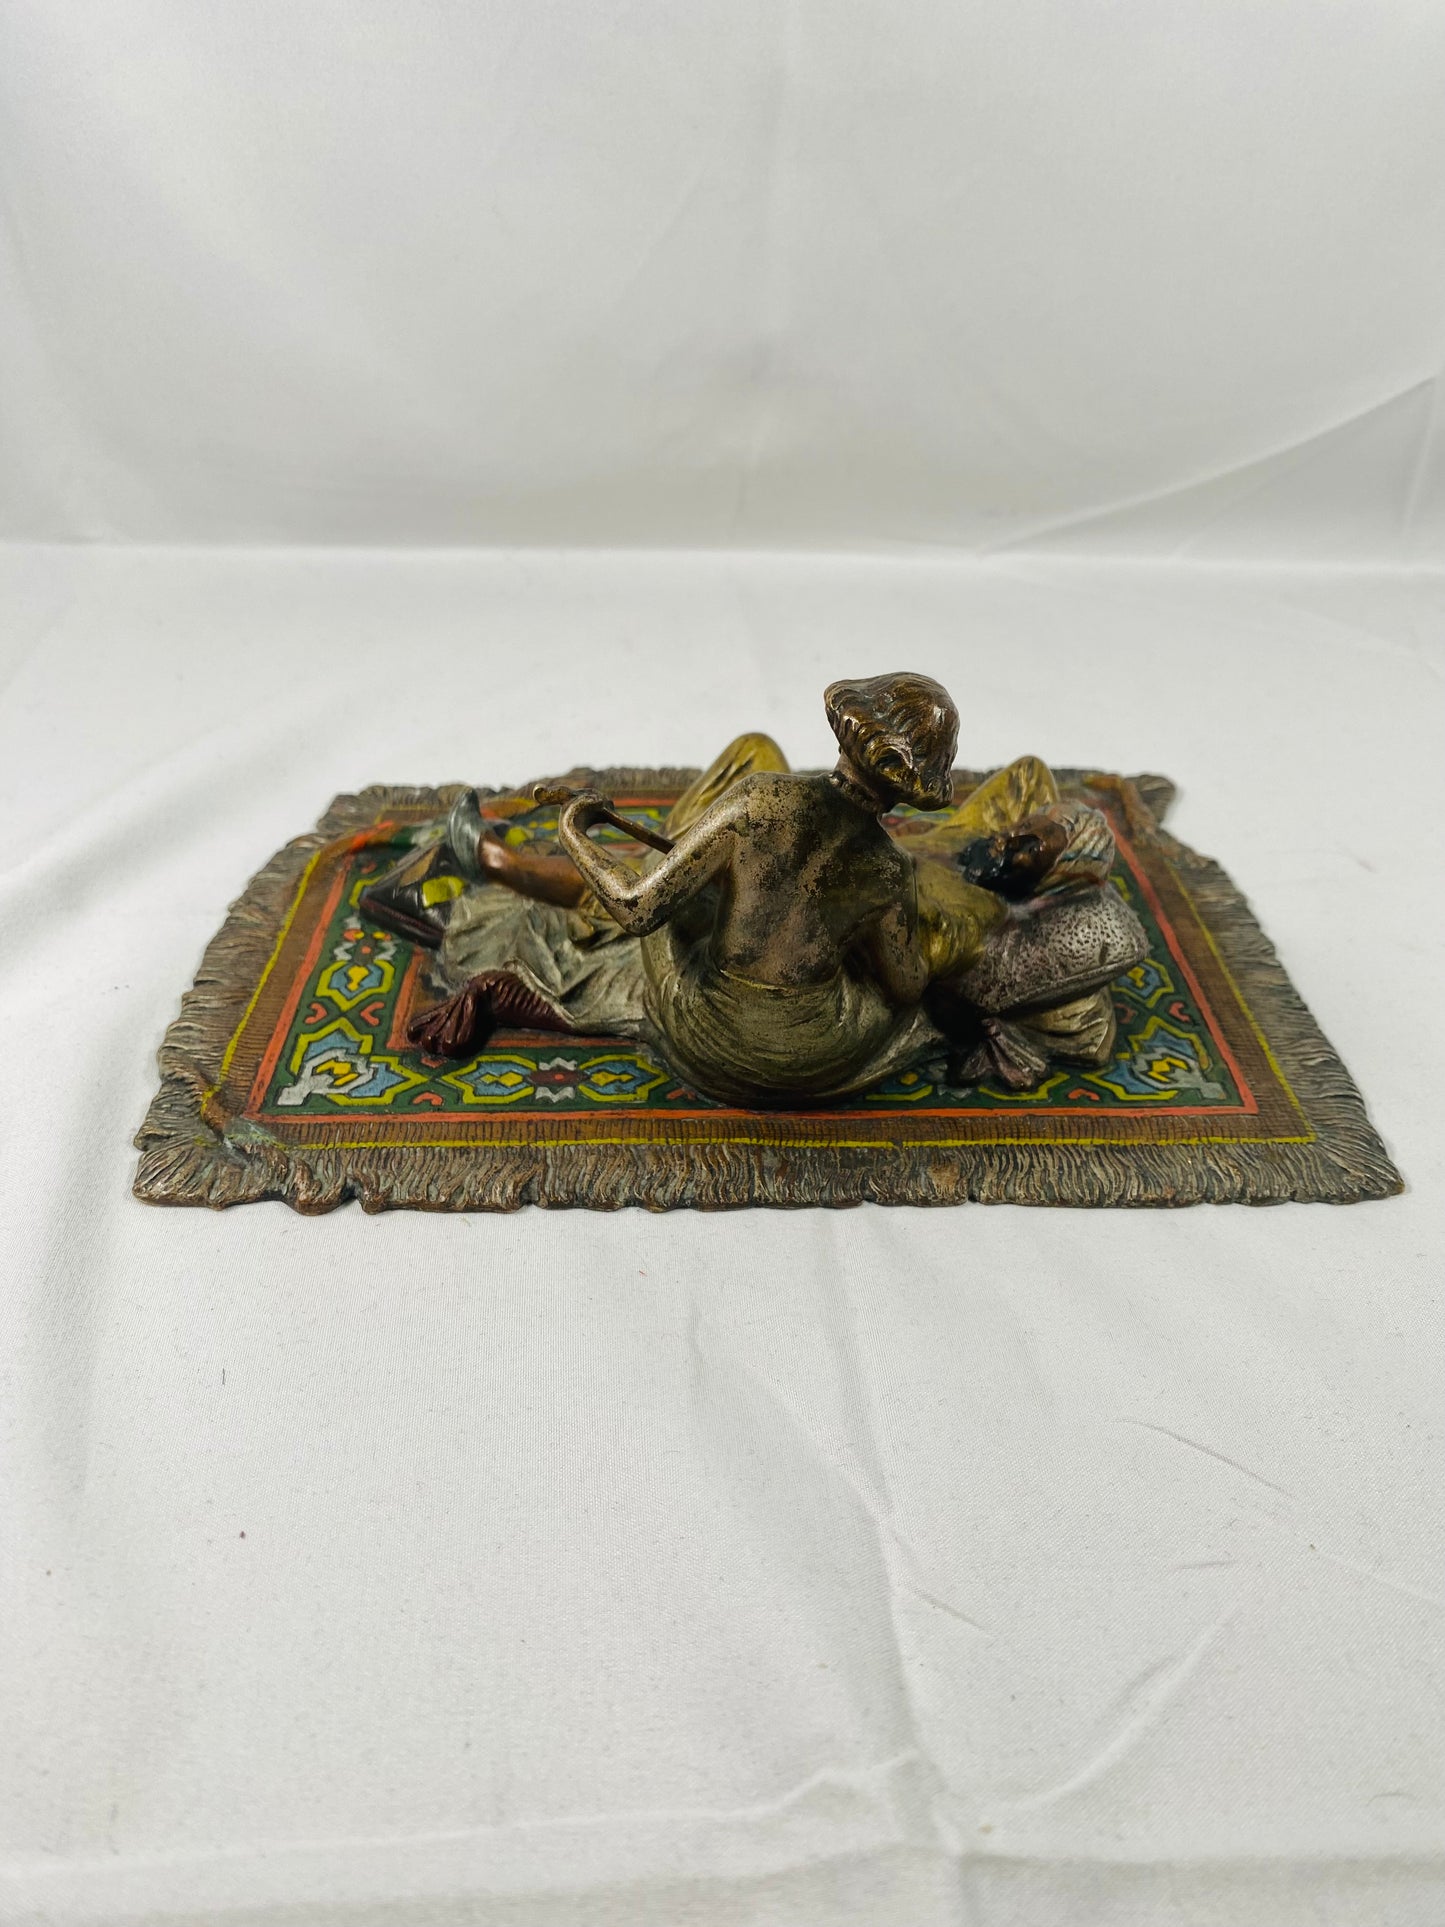 Viennese Cold Painted Erotic Bronze of Man and Female Musician on Carpet, Moorish / Oriental Style c. 1910. Attributed to Franz Bergman.